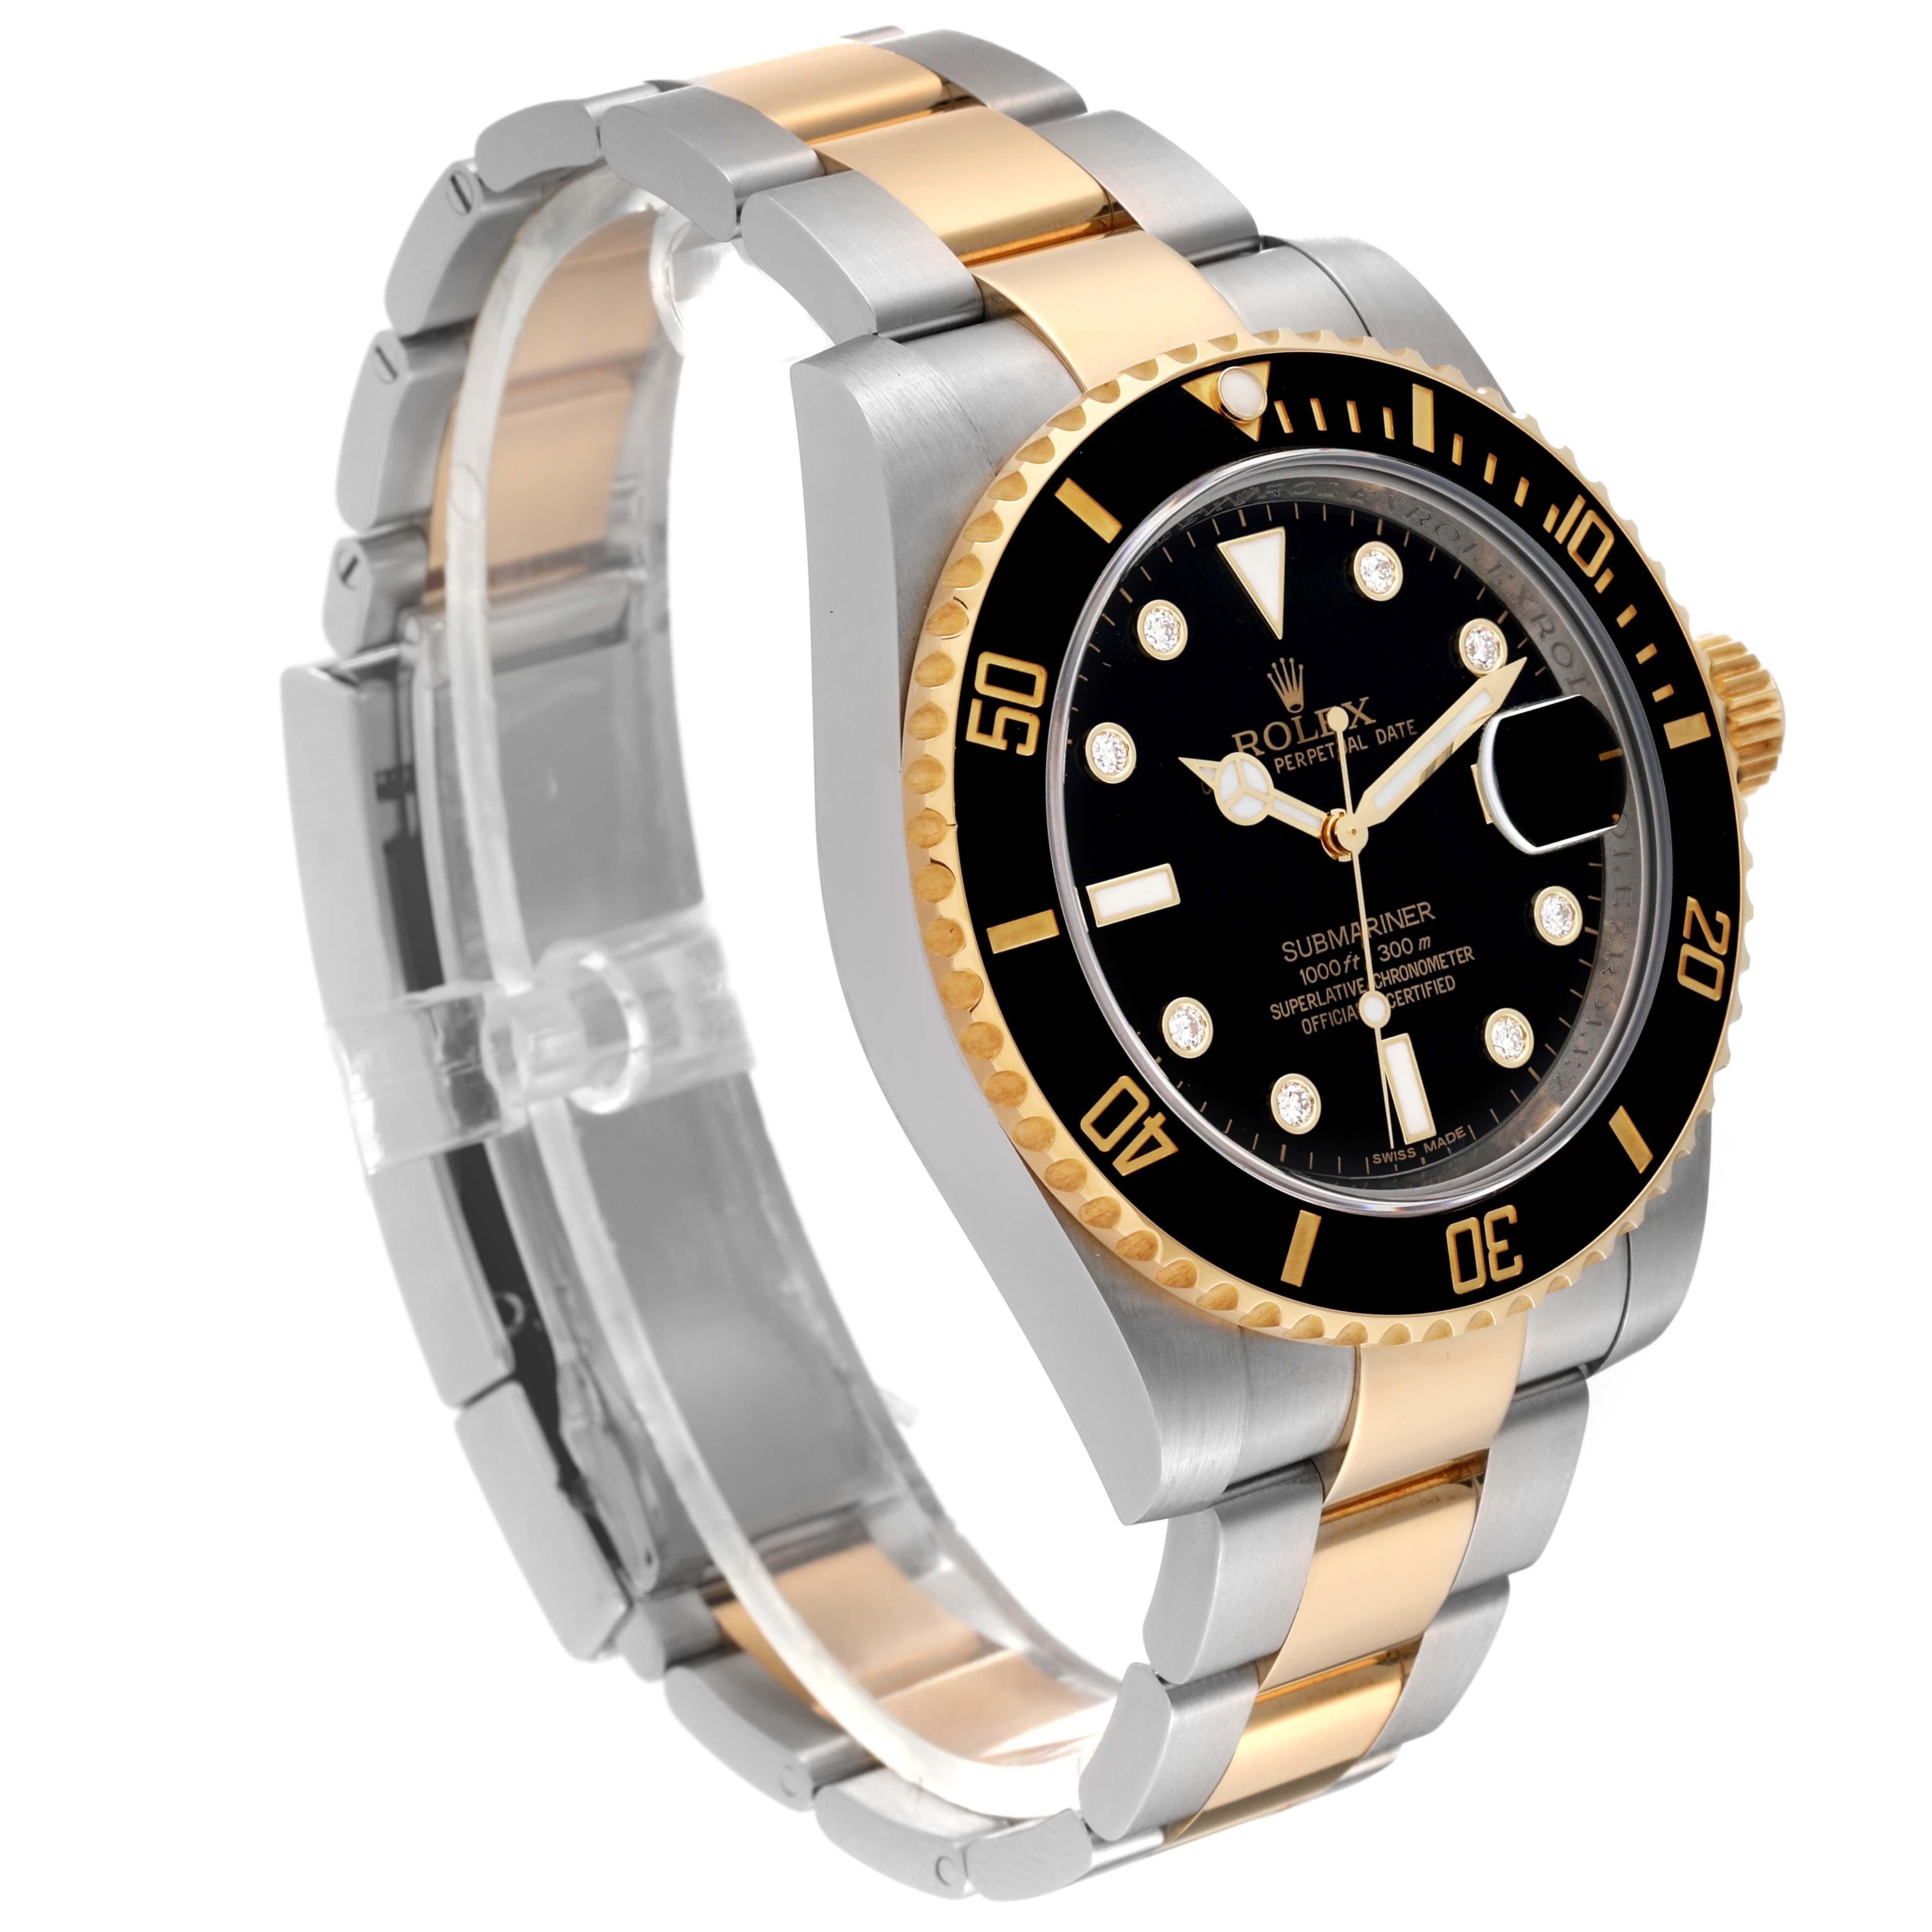 Rolex Submariner Steel Yellow Gold Black Diamond Dial Mens Watch 116613 For Sale 1